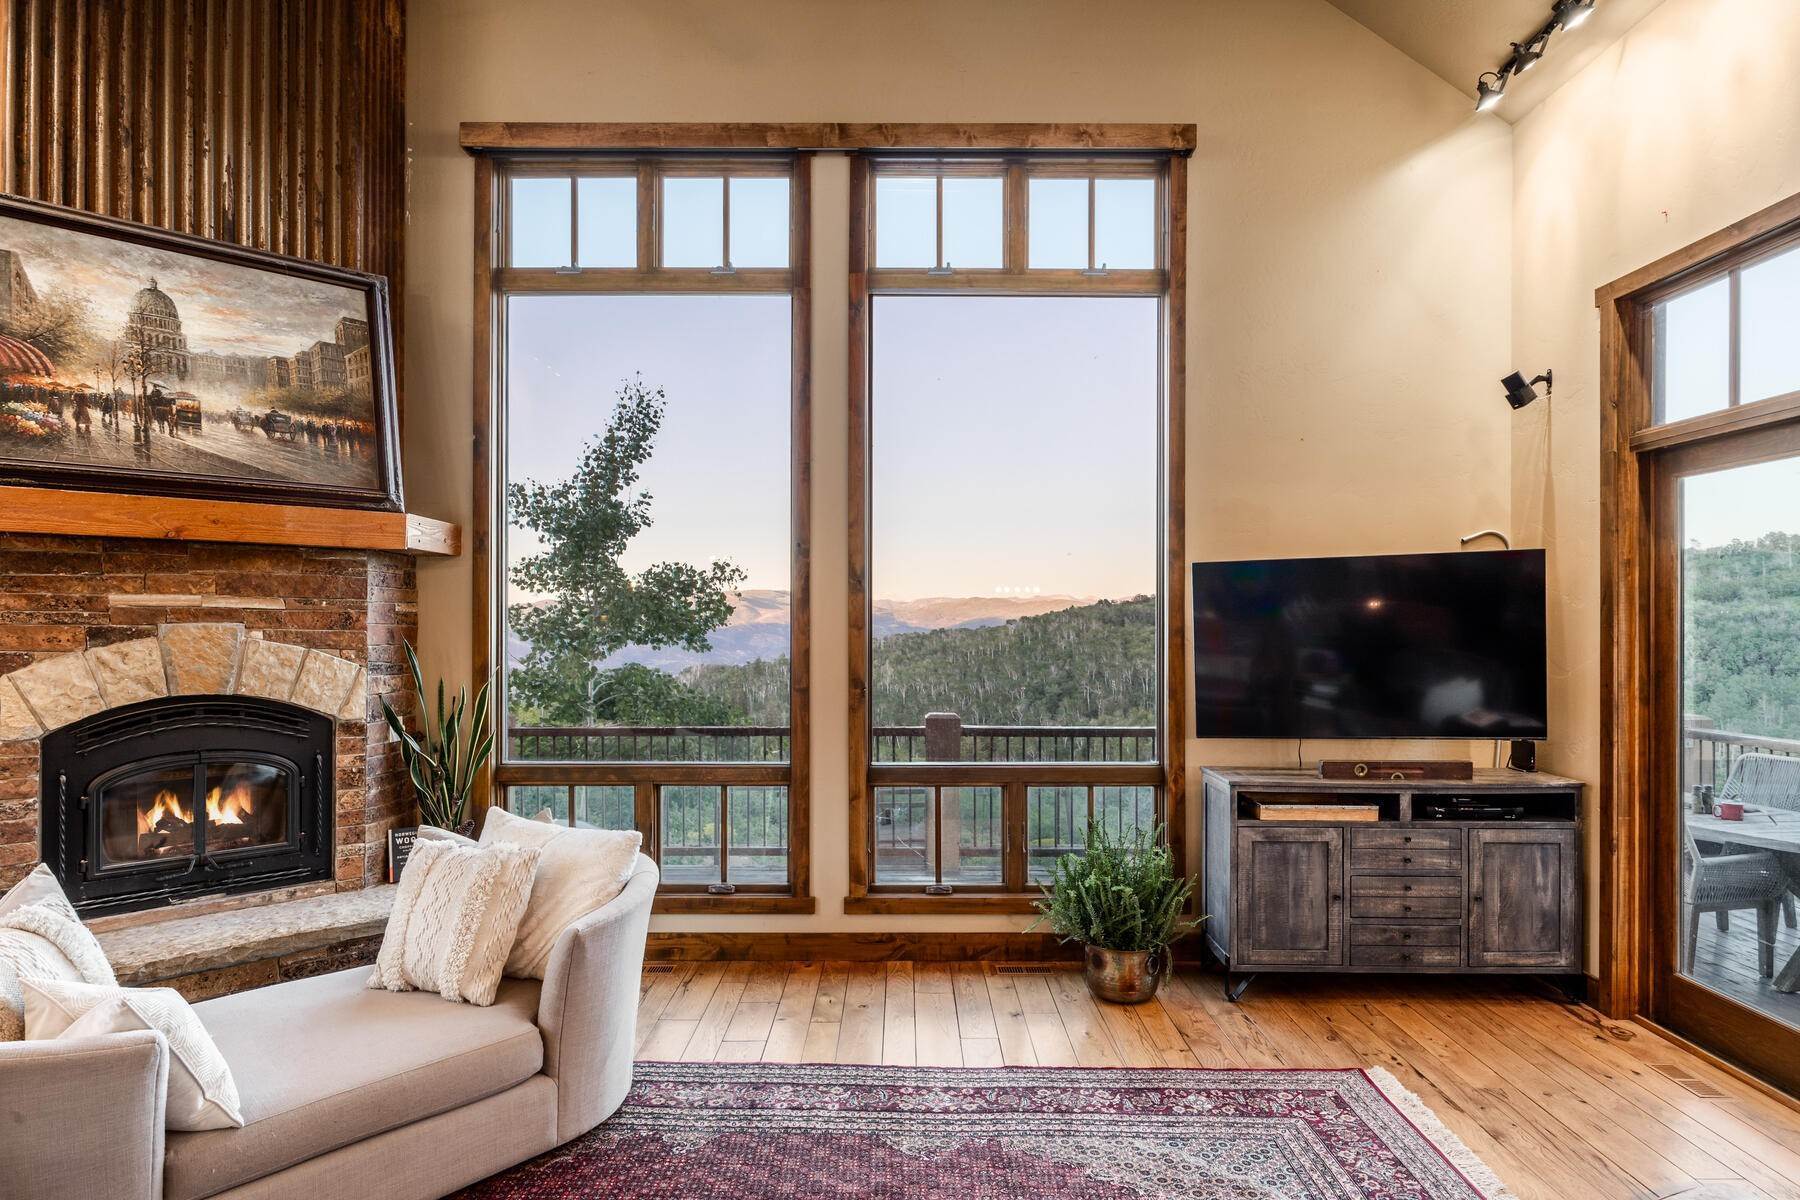 Single Family Homes for Sale at Stunning Mountain Retreat on Acreage in Tollgate Canyon 2463 Bull Moose Dr Coalville, Utah 84017 United States